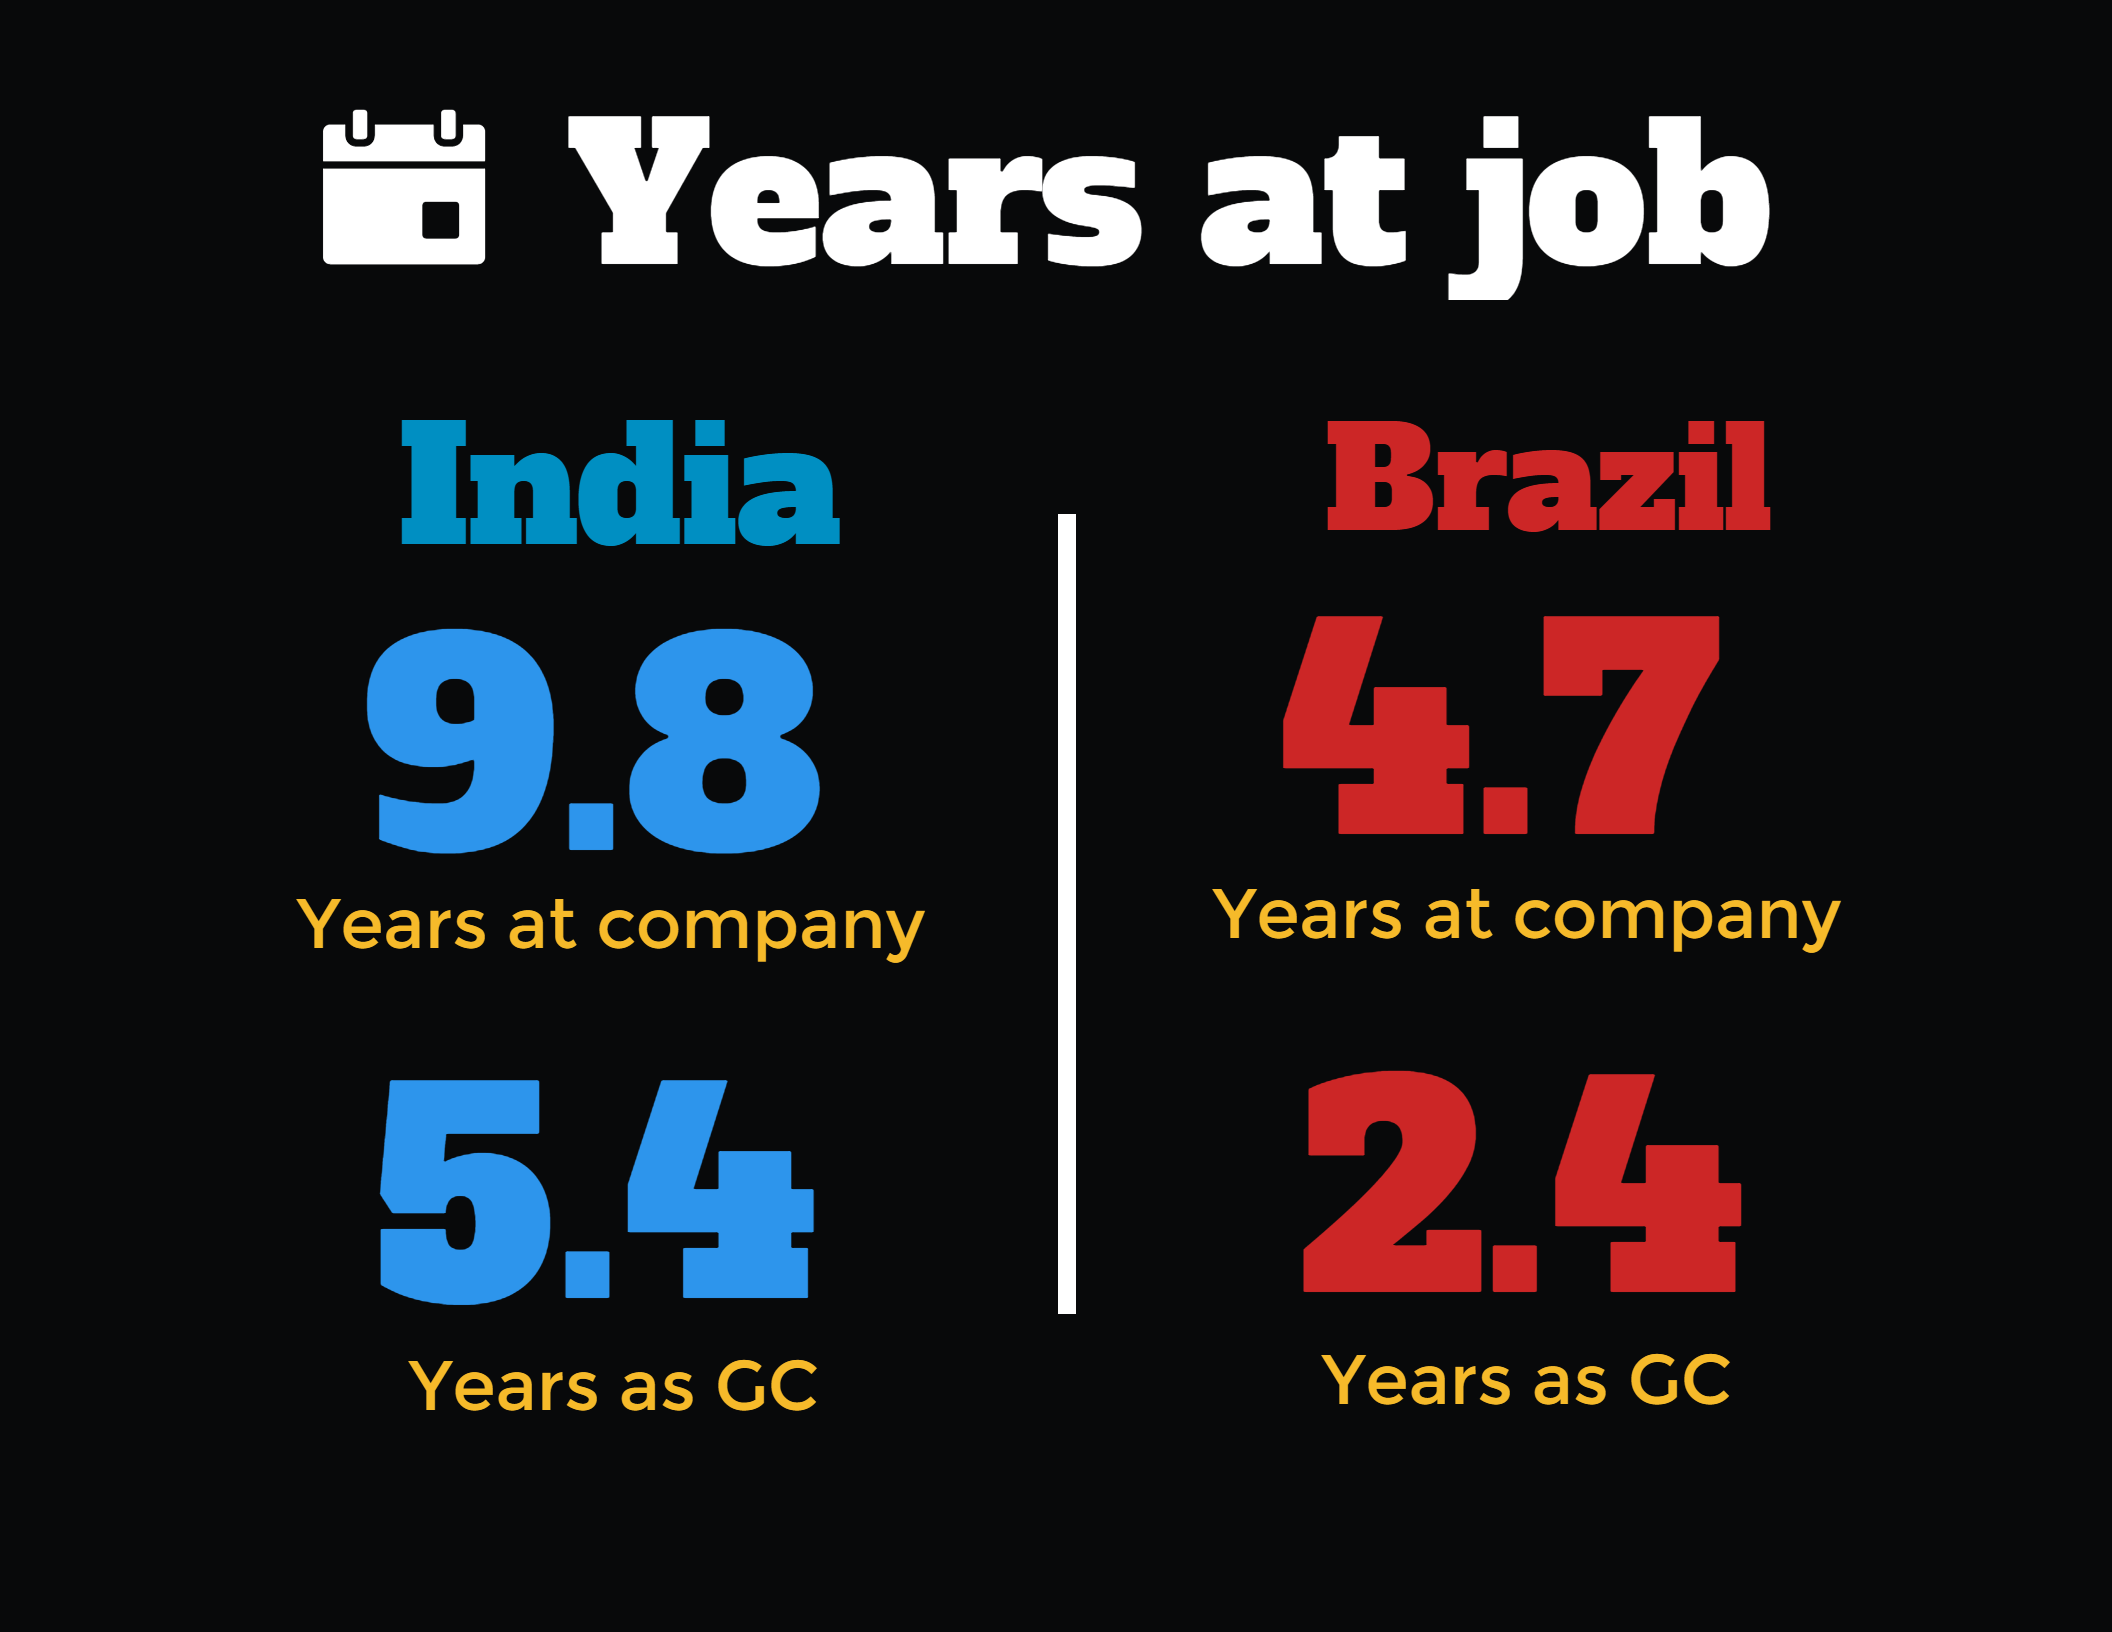 Years at job of the general counsel - India and Brazil